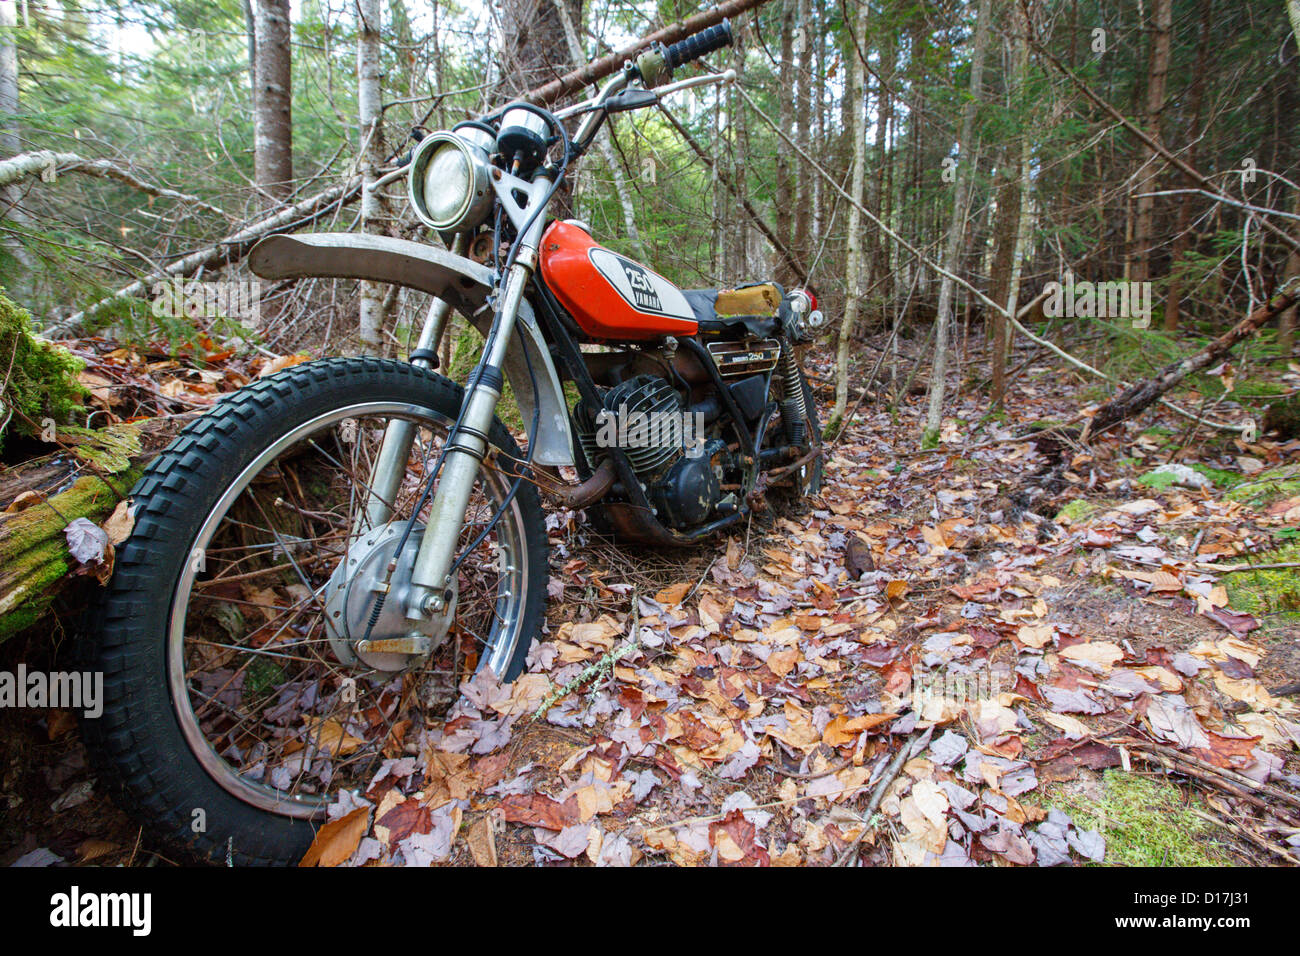 Abandoned Yamaha 250 motorcycle near the Mt Cilley Trail in Woodstock, New Hampshire USA Stock Photo